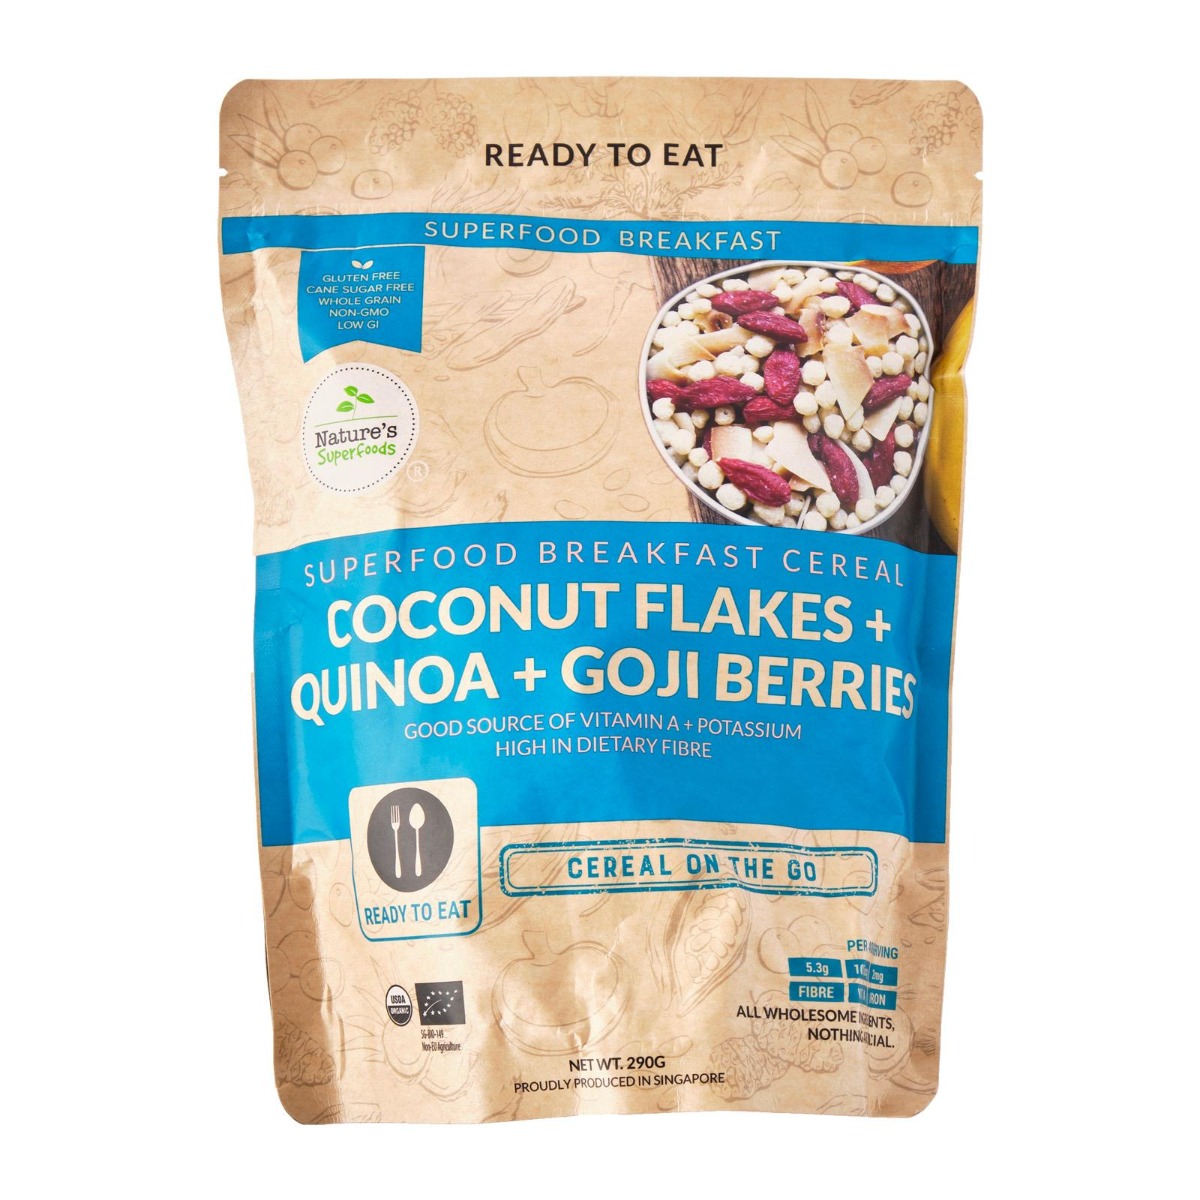 Organic Coconut Flakes - Quinoa - Goji Berries Cereal Mix-290g resealable pack front